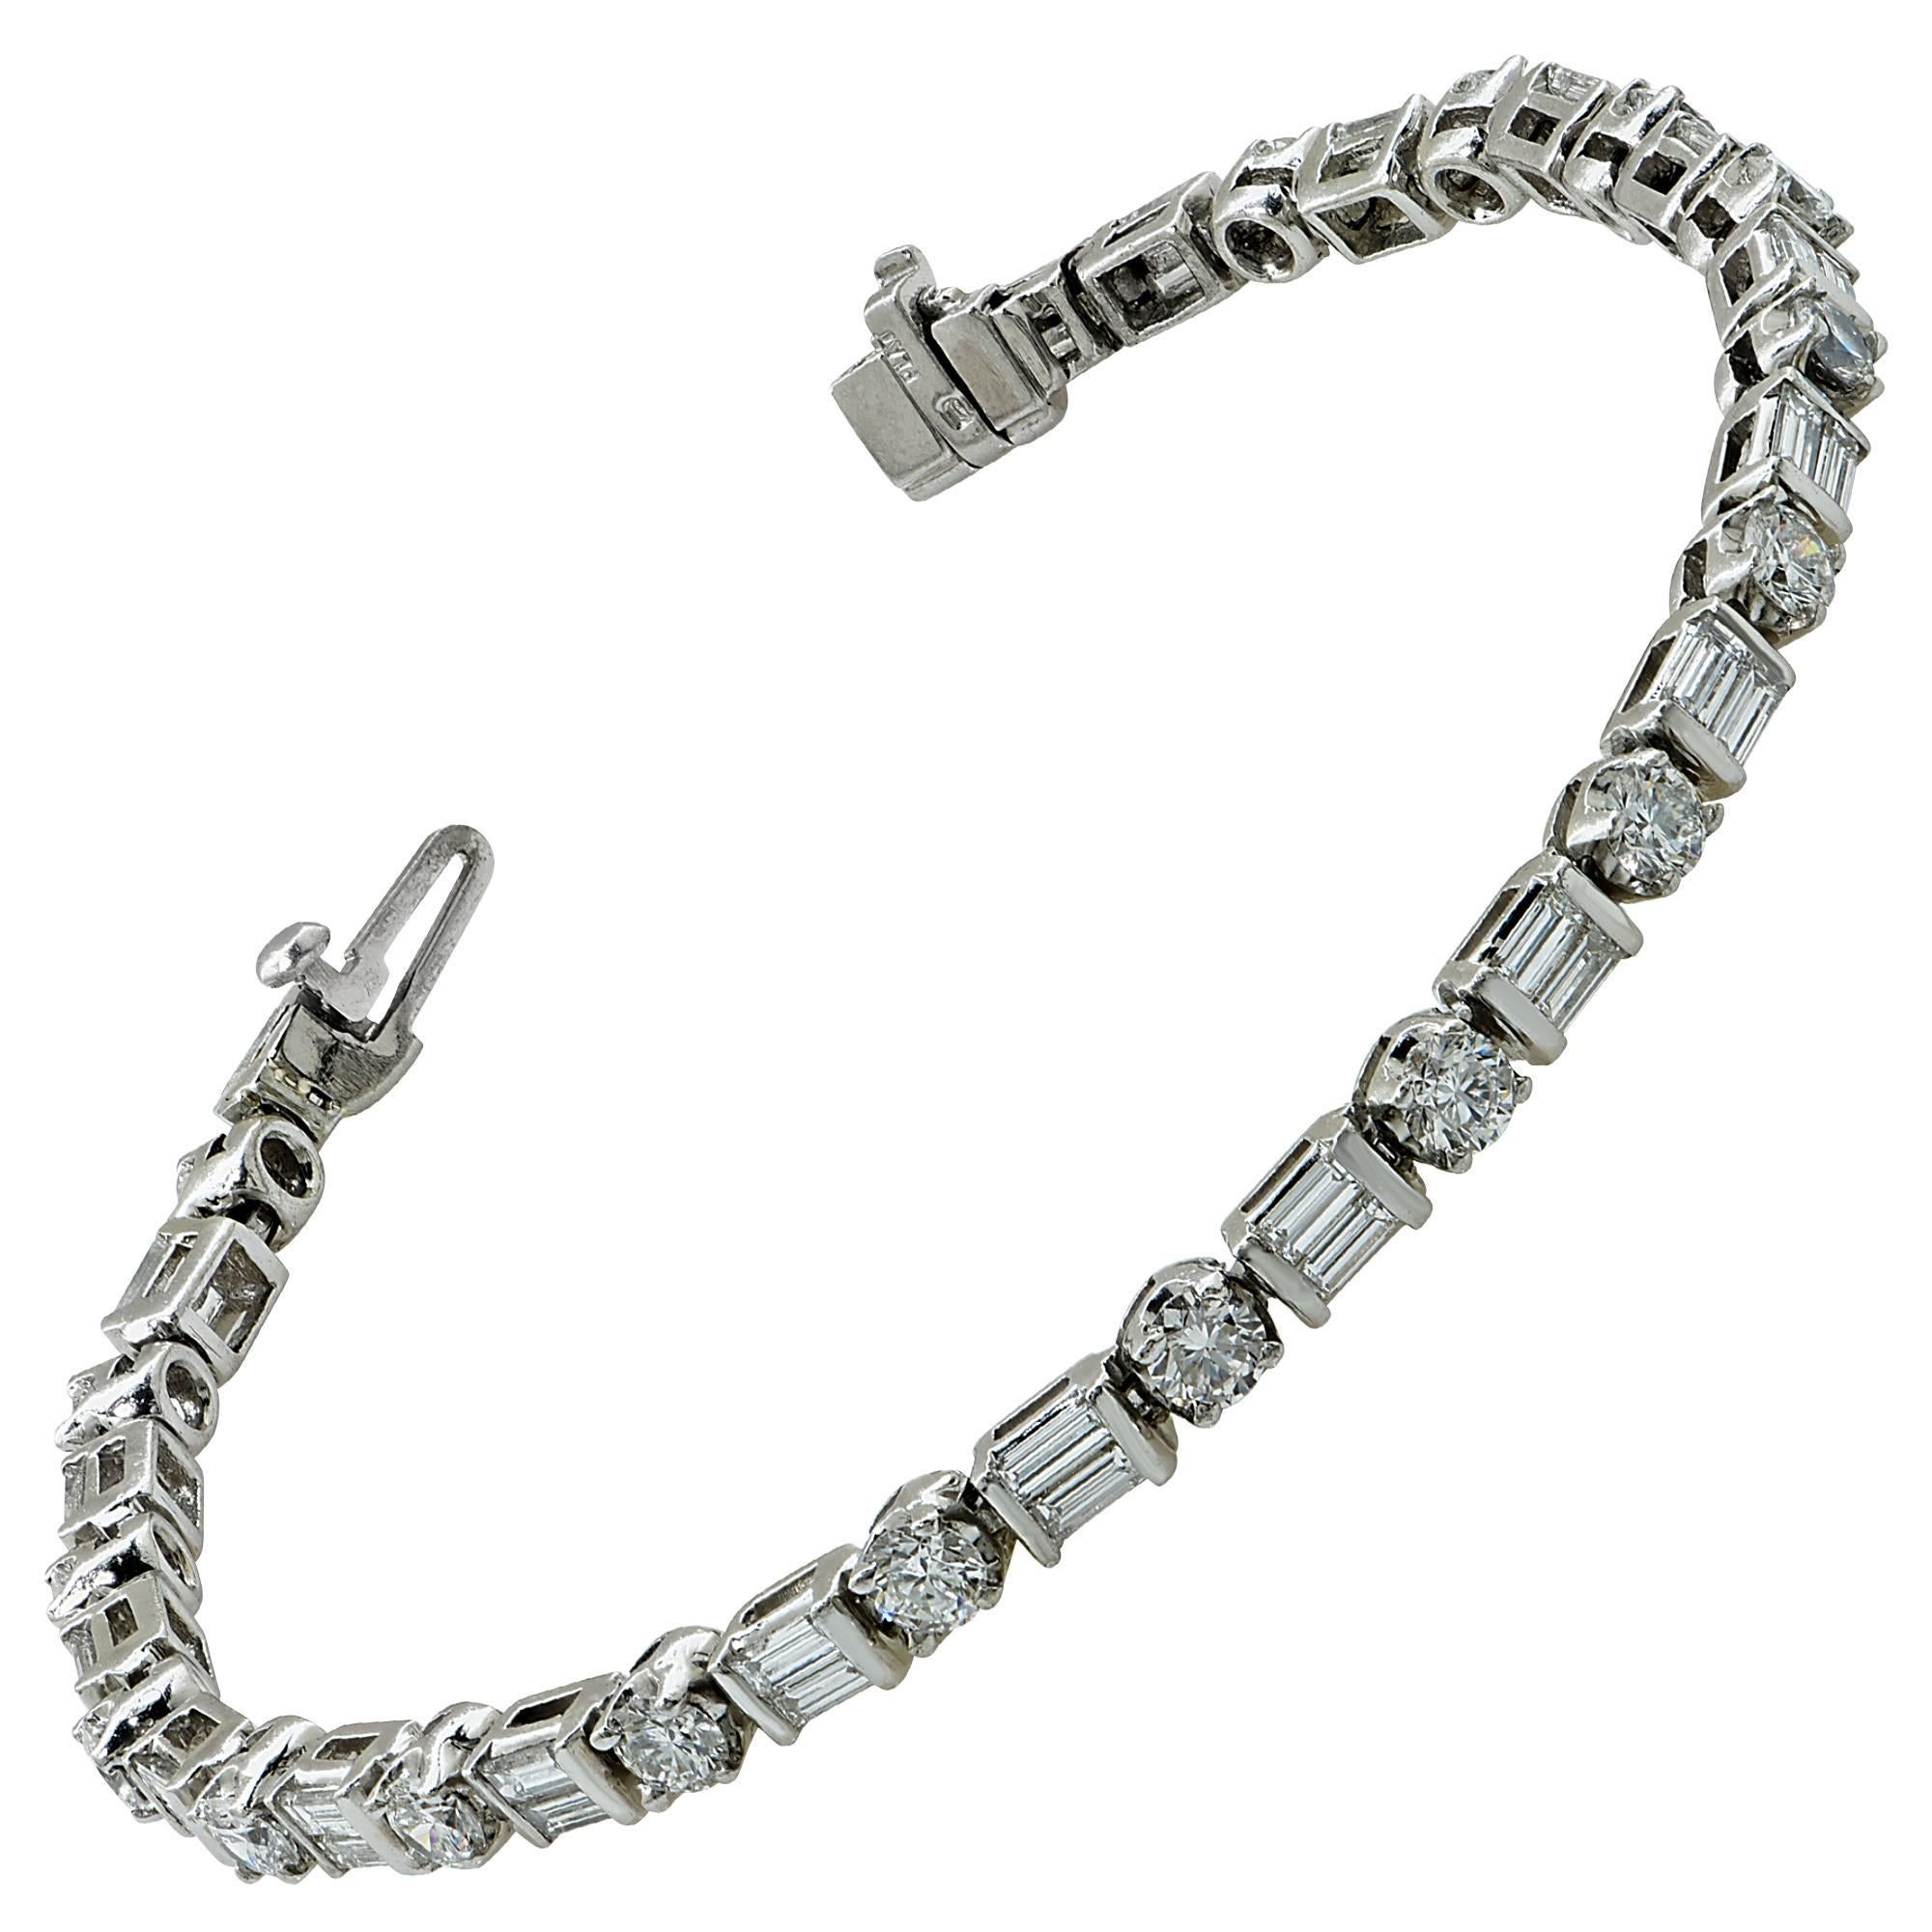 Platinum bracelet containing 18 round brilliant cut diamonds weighing approximately 2.75cts and 38 baguette cut diamonds weighing approximately 2cts G color and VS clarity.

This gorgeous bracelet measures 7 inches in length.
It is stamped and